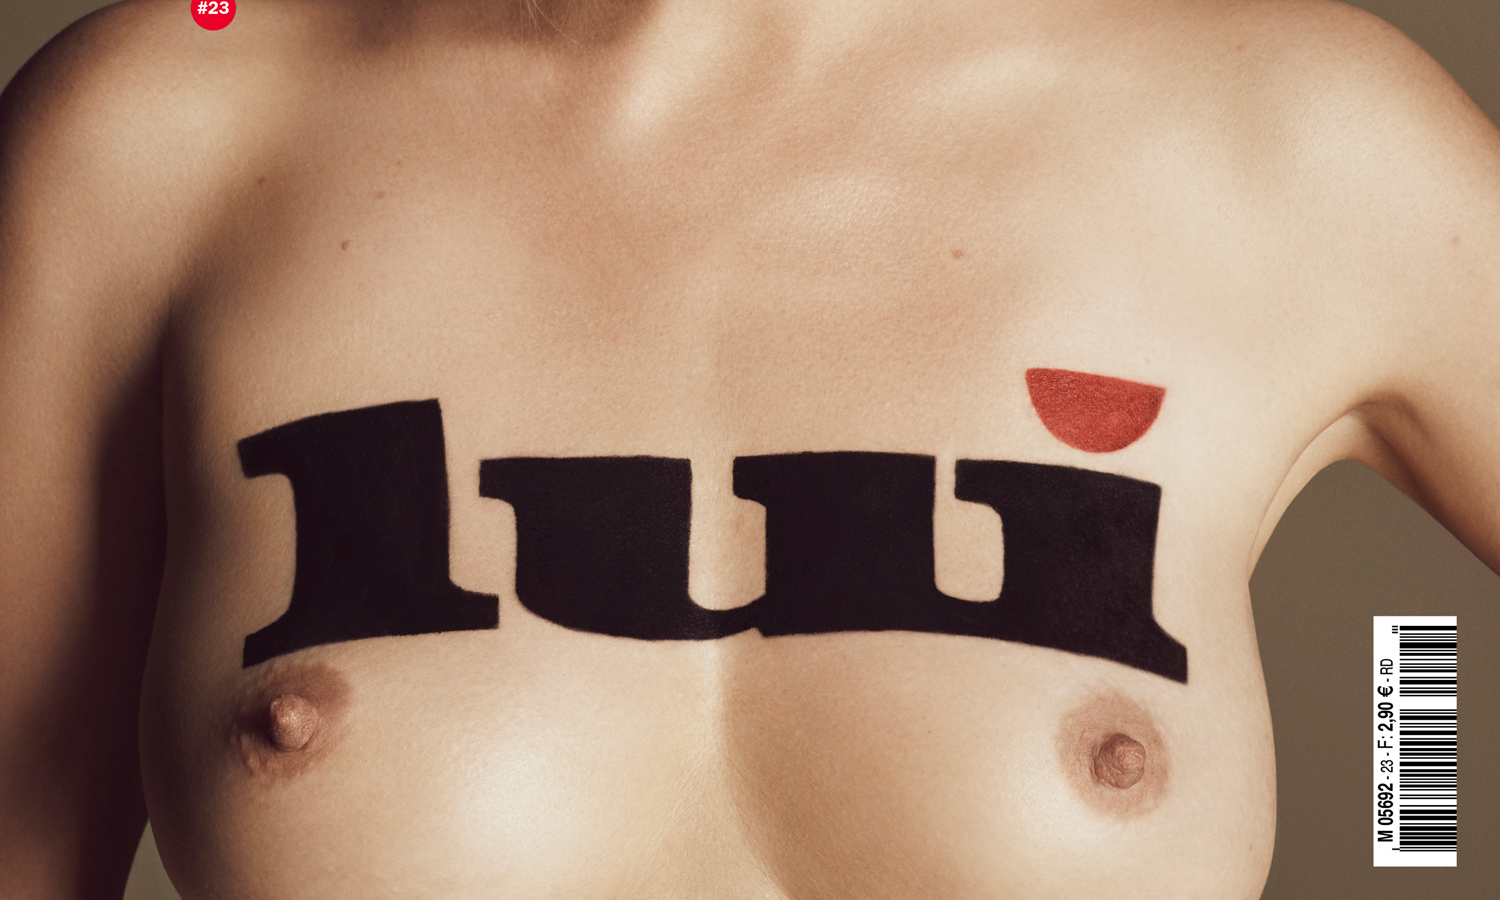 12 Top Models Go Topless for Lui Magazine Covers. Merry Christmas!